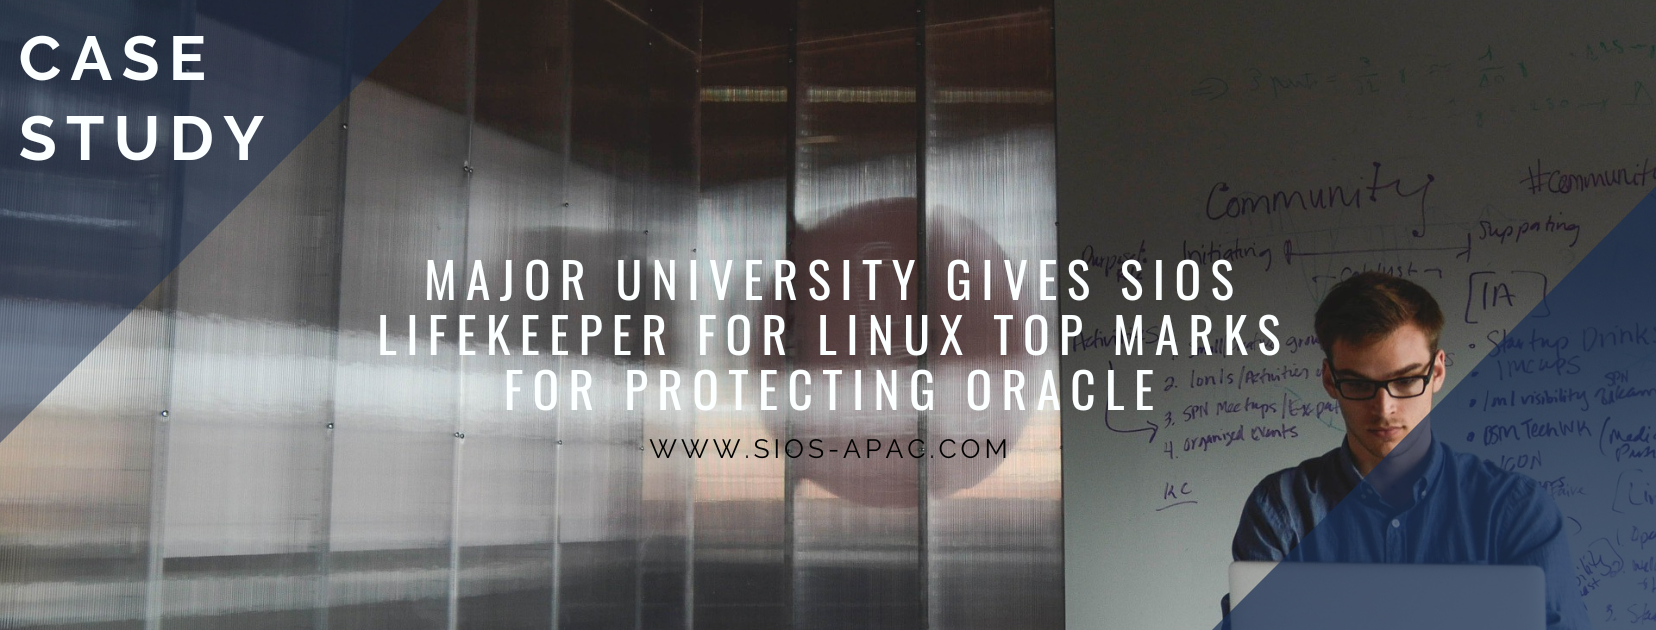 Major University Gives SIOS LifeKeeper for Linux Top Marks for Protecting Oracle